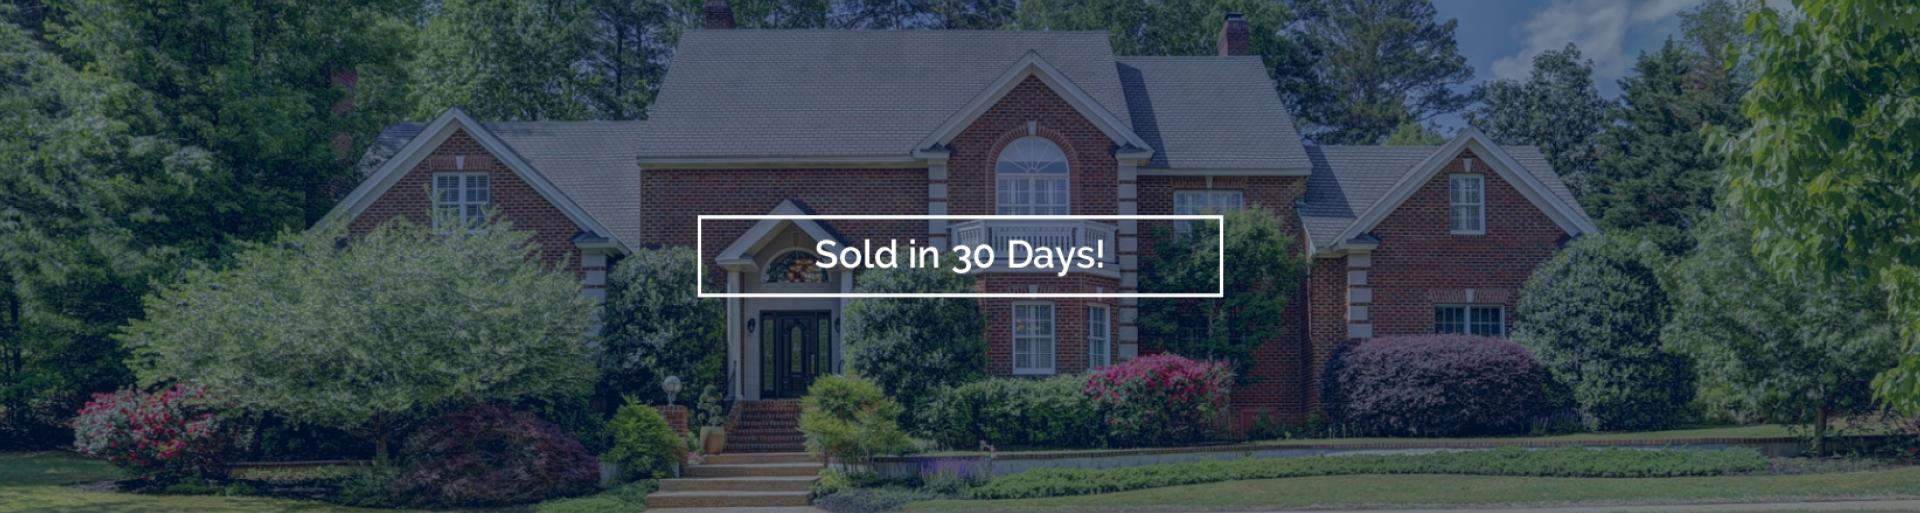 Sold in 30 Days!